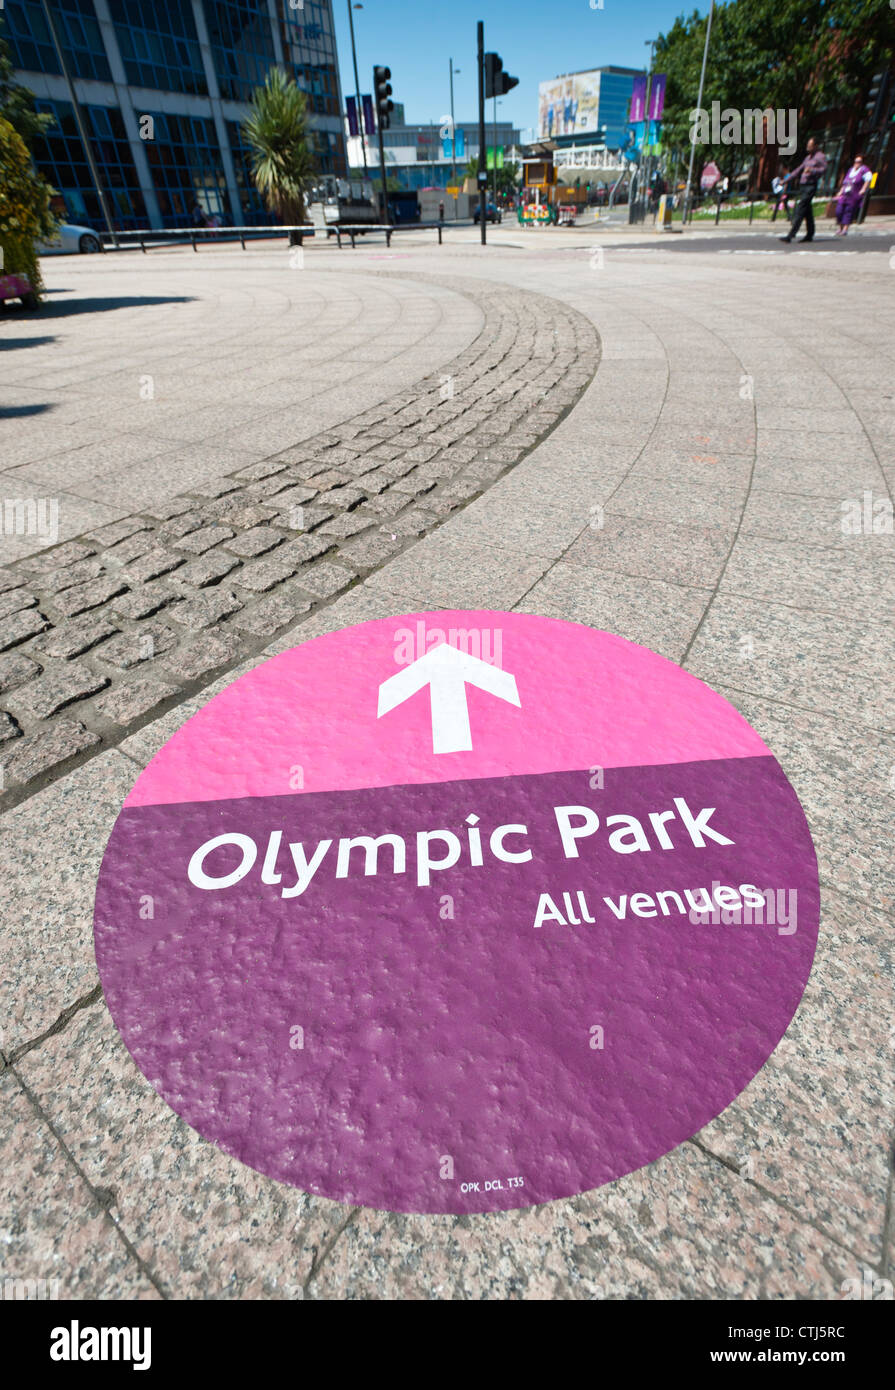 Signage for the Olympic games at Stratford station, East End of London, England Stock Photo